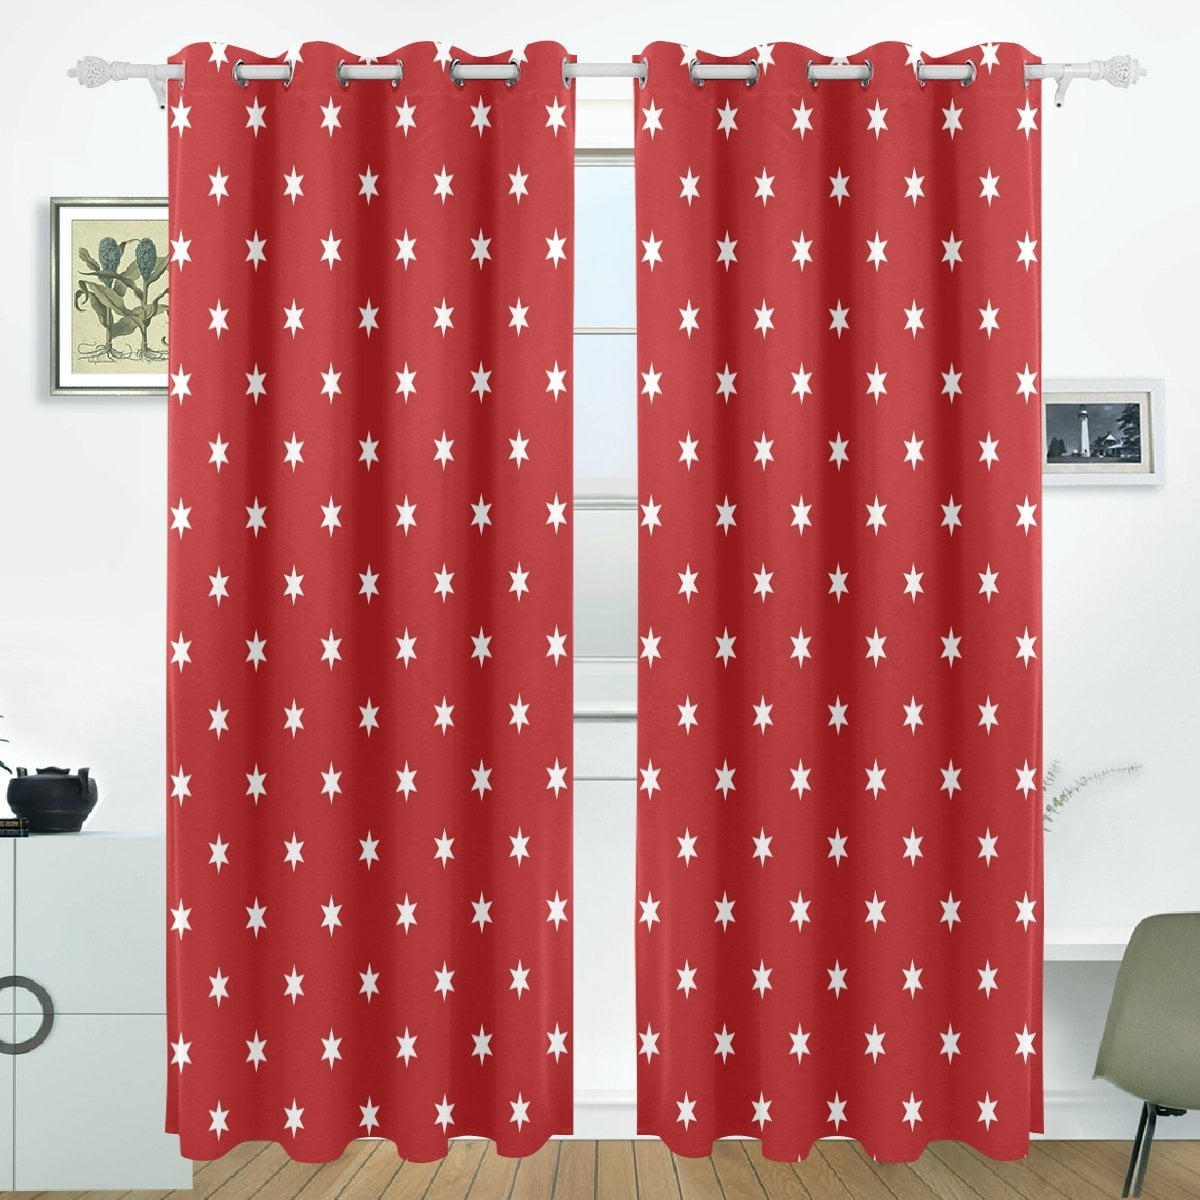 Thermal Insulated Window Drapes Vivid Cartoon Room Darkening Treatments with Grommet Top for Living Room Bedroom 52x90in Possta Decor Blackout Window Curtains Christmas Cute Gingerbread